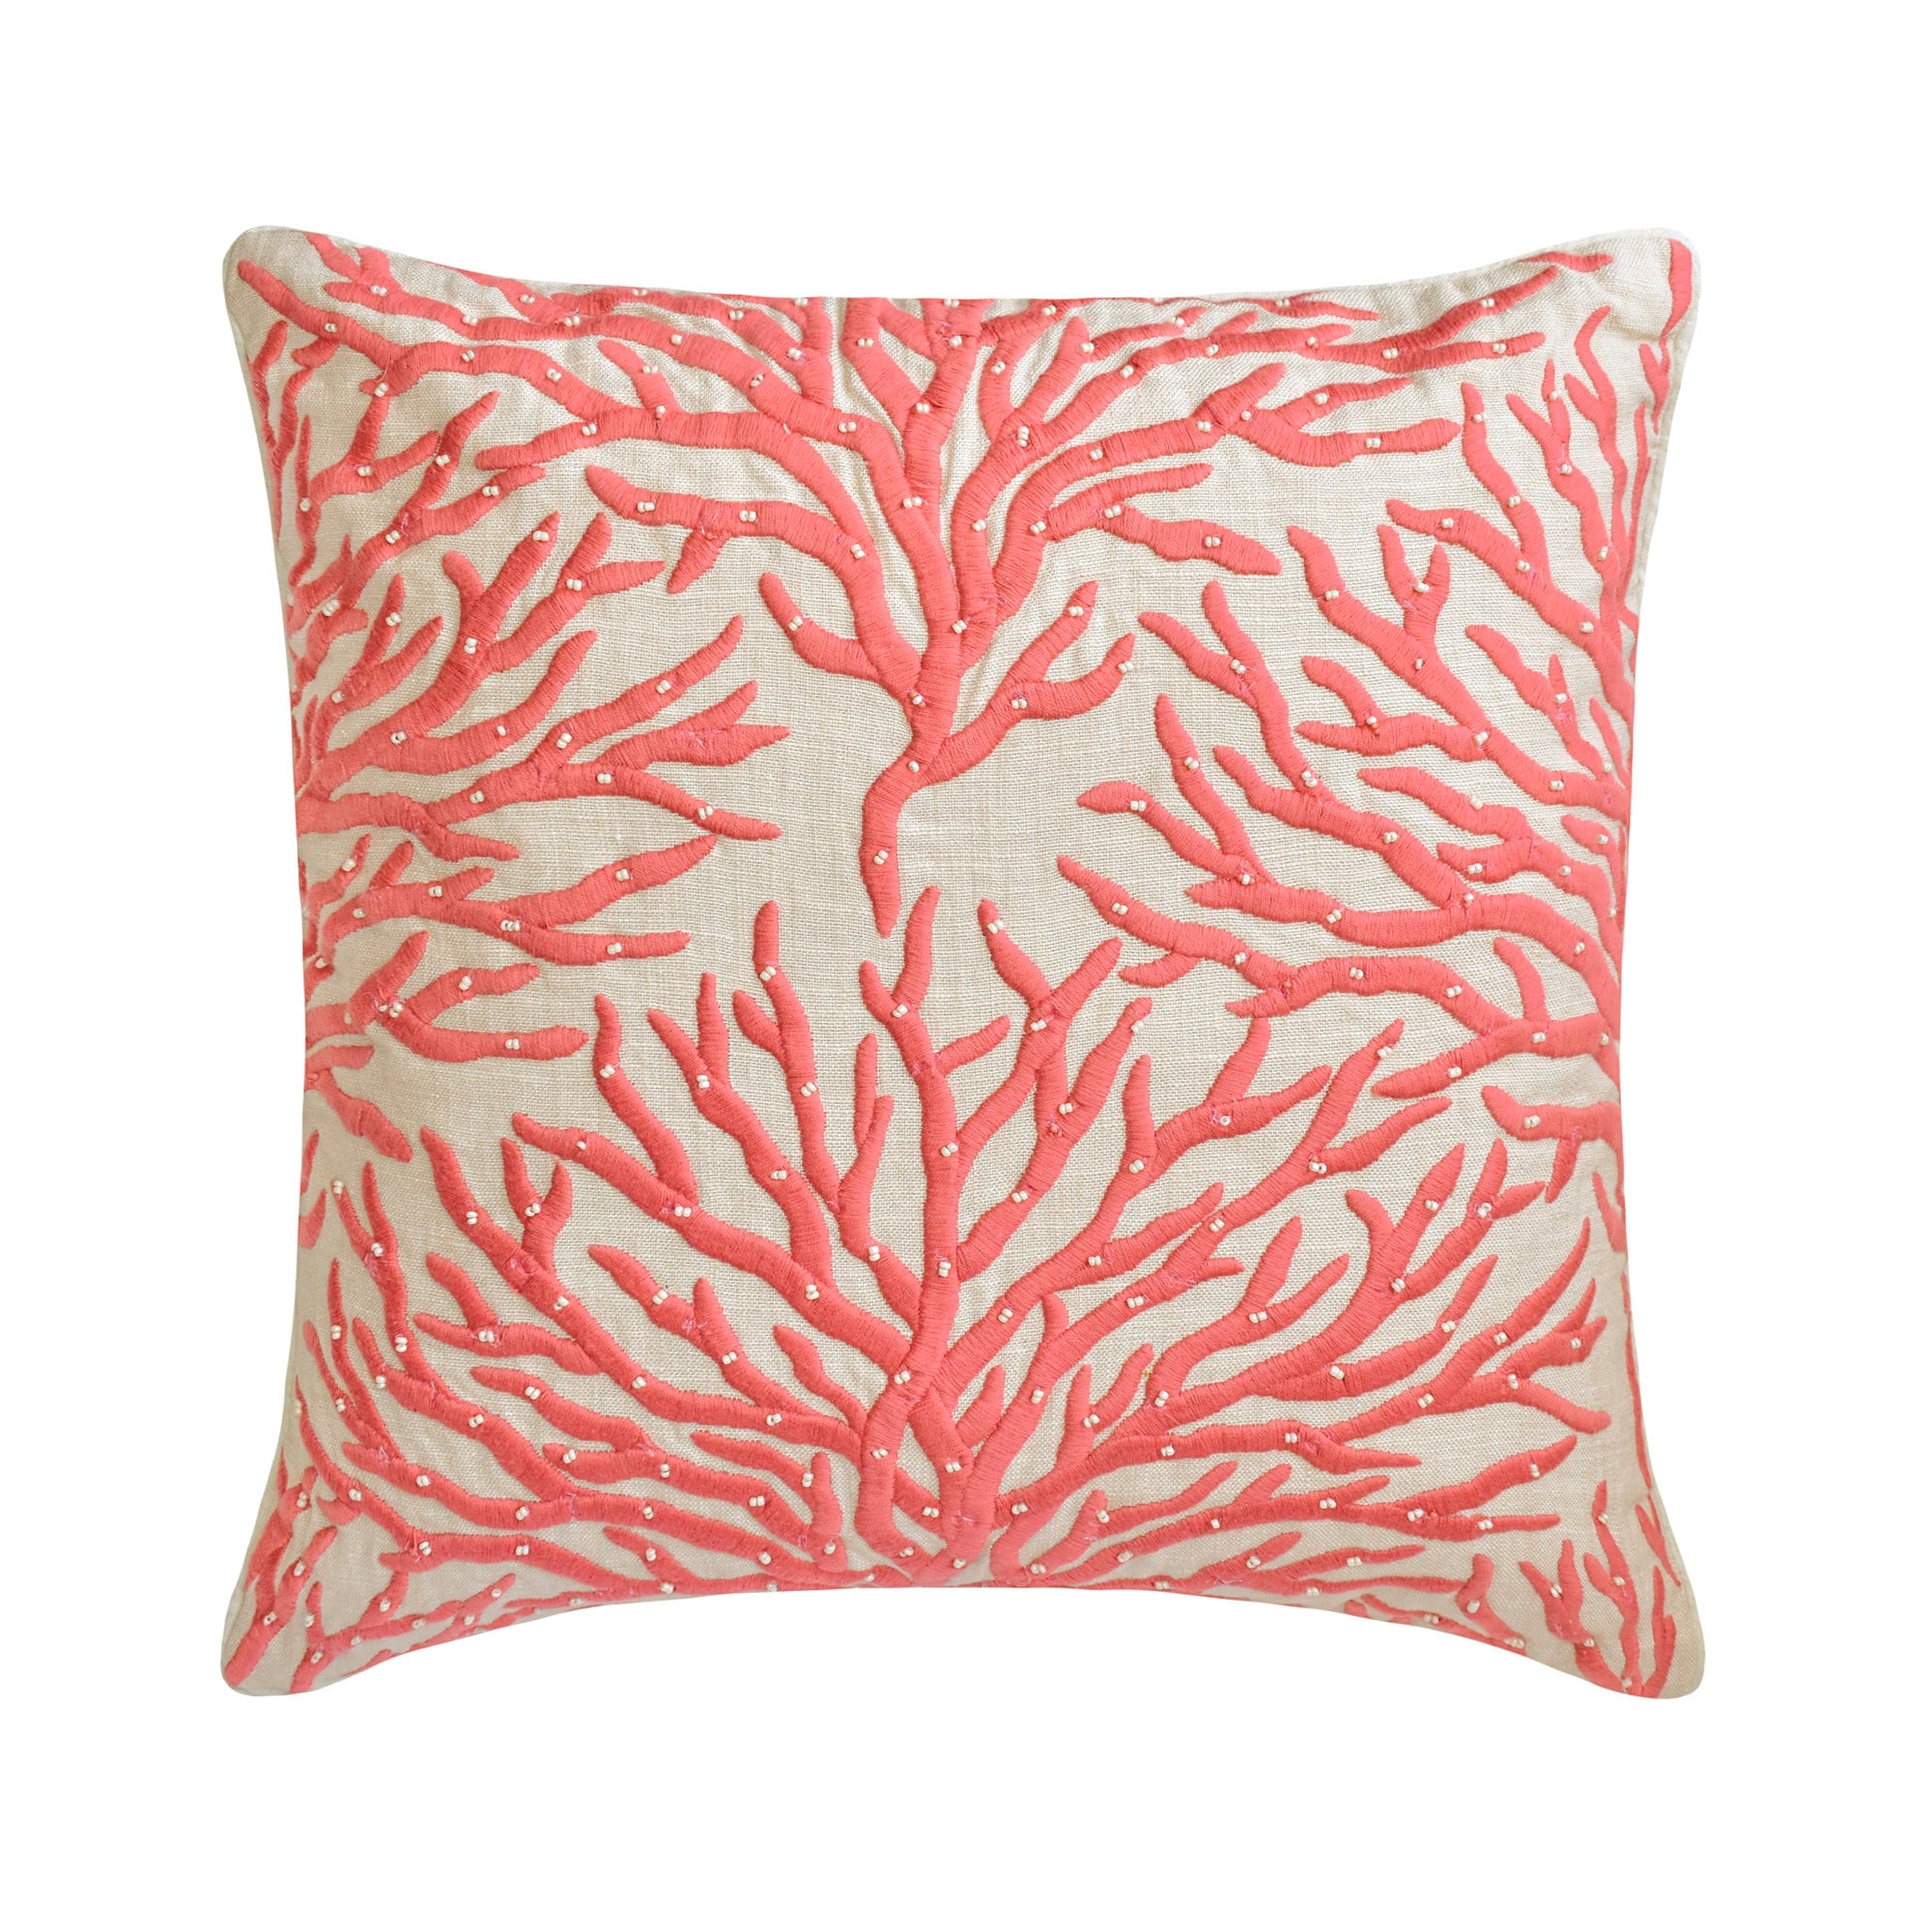 Soft Textured Throw Pillow Covers 20x20 inch Coral Orange, Set of